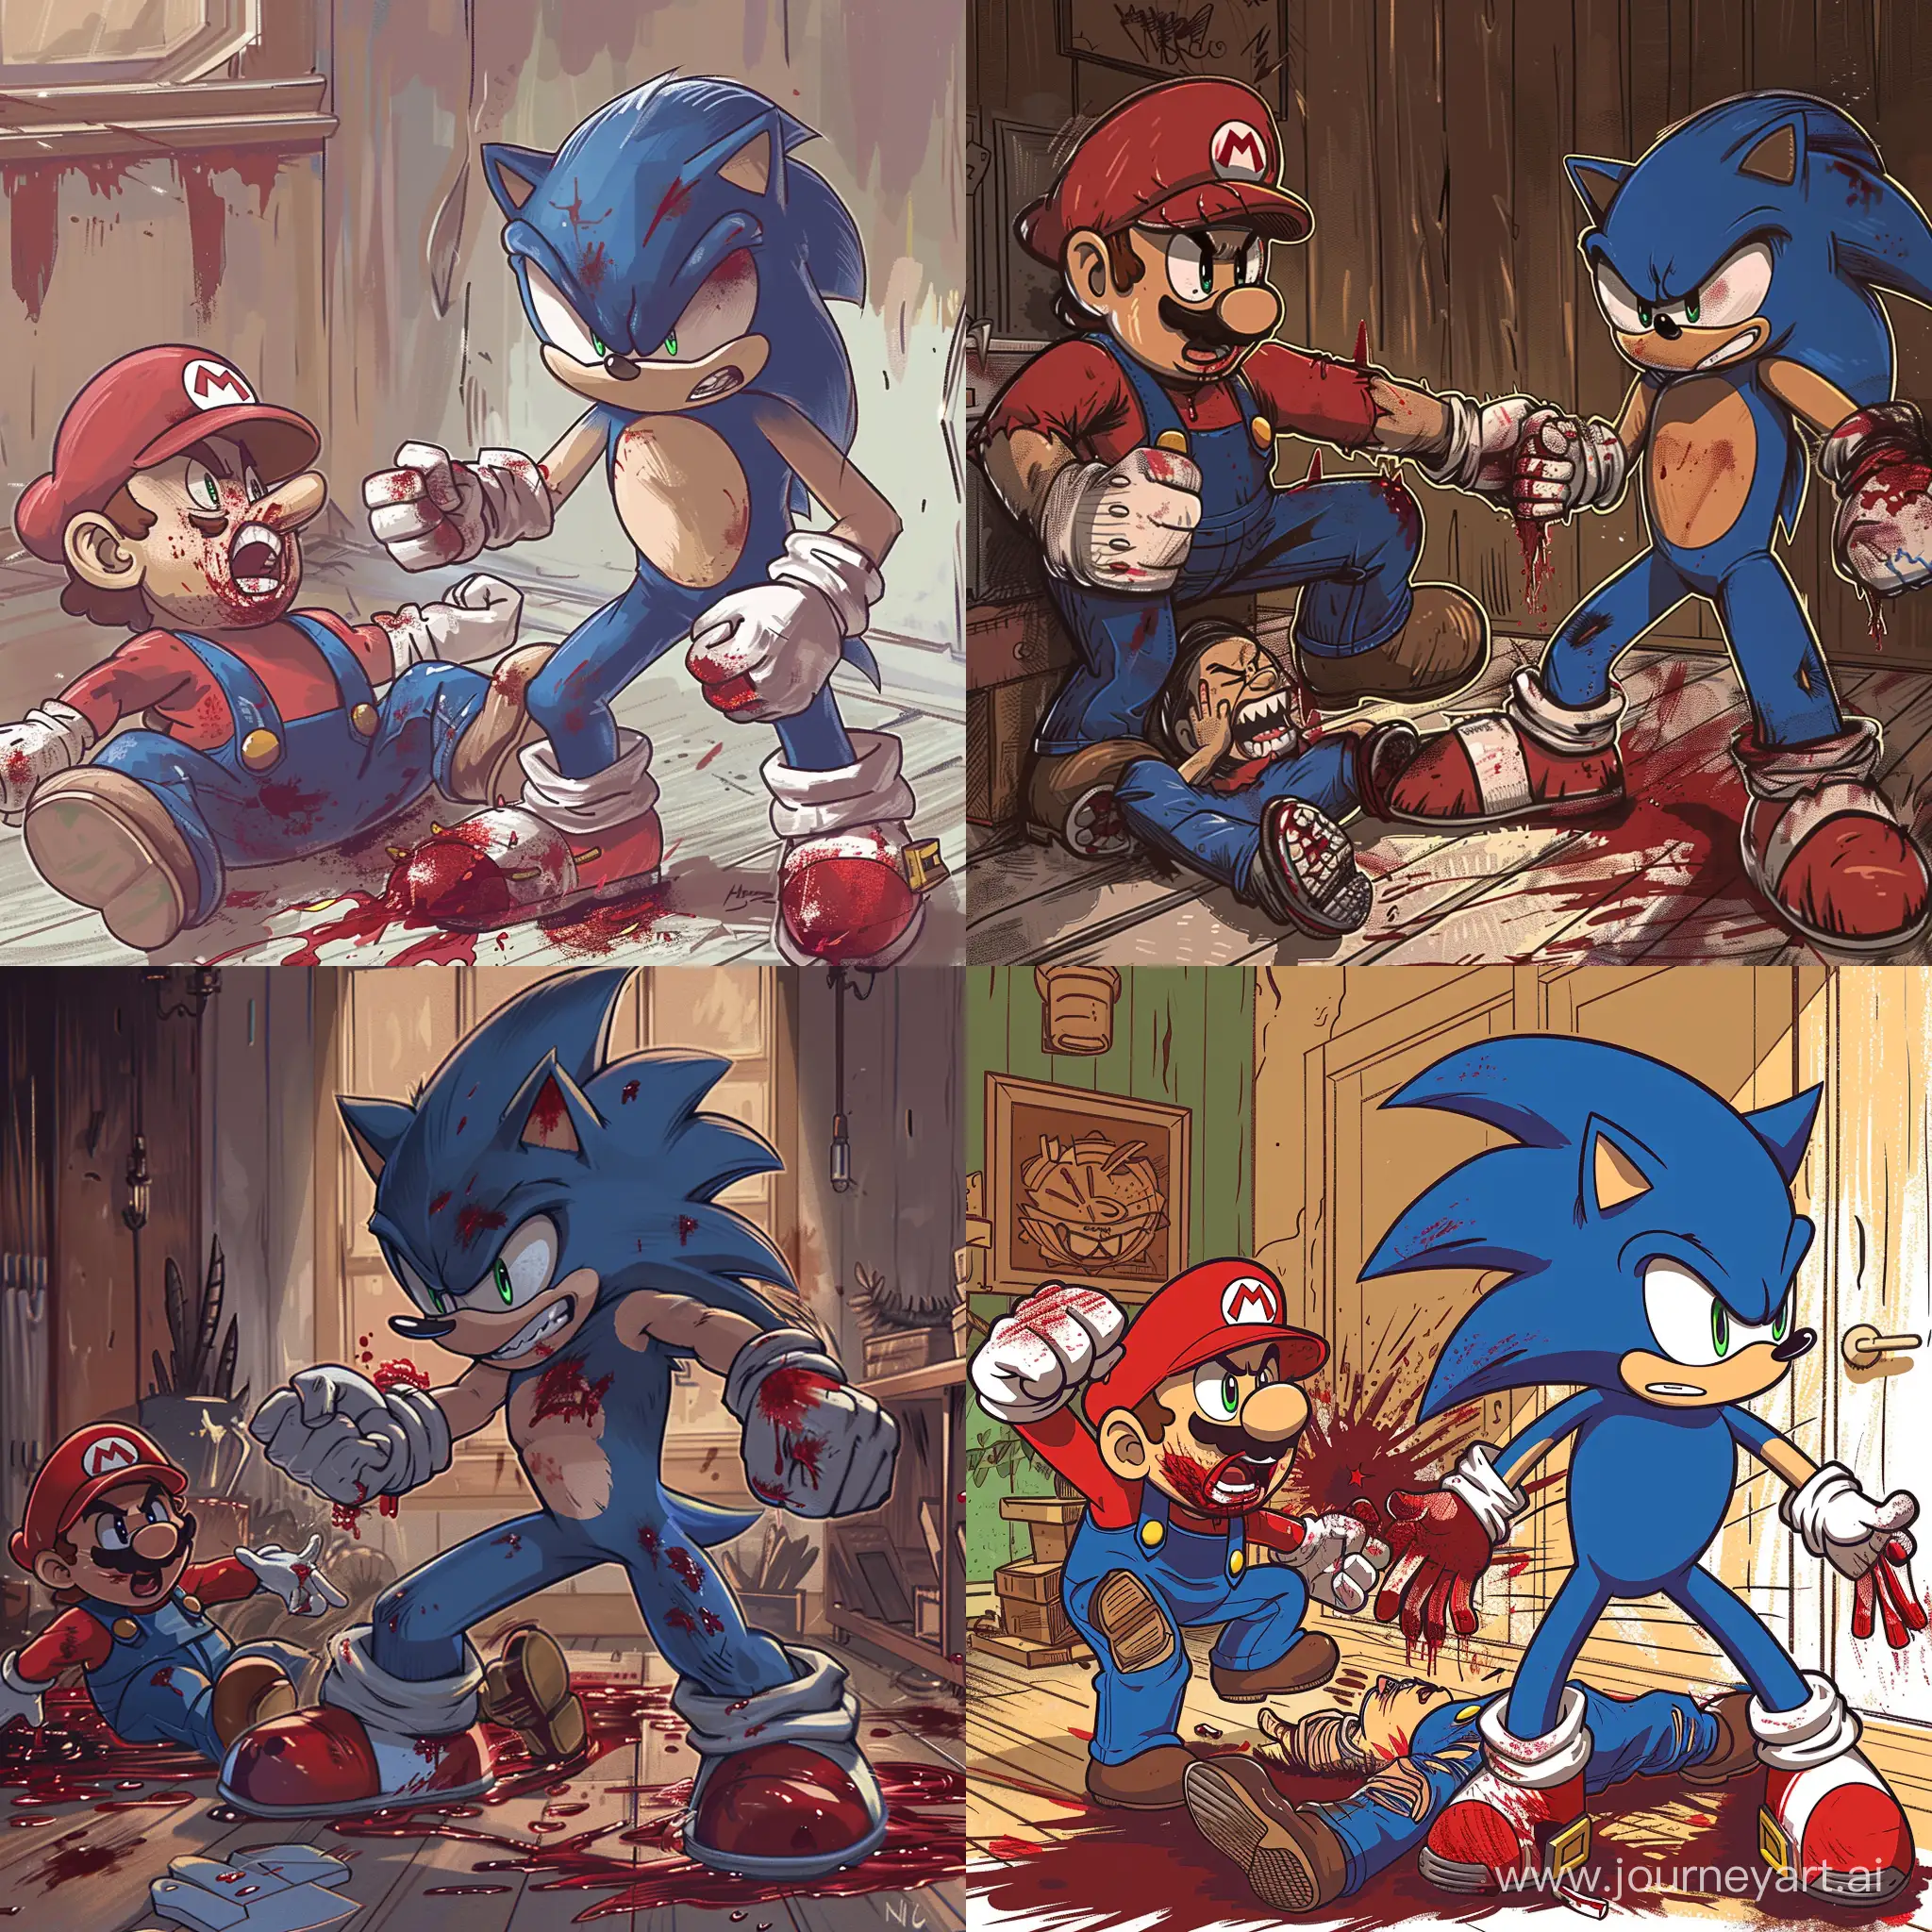 Sonic battle with mario and mario is on the floor in blood as sonic stand over him breathing heavily with anger and hands ready with blood on sonic hands belly and face